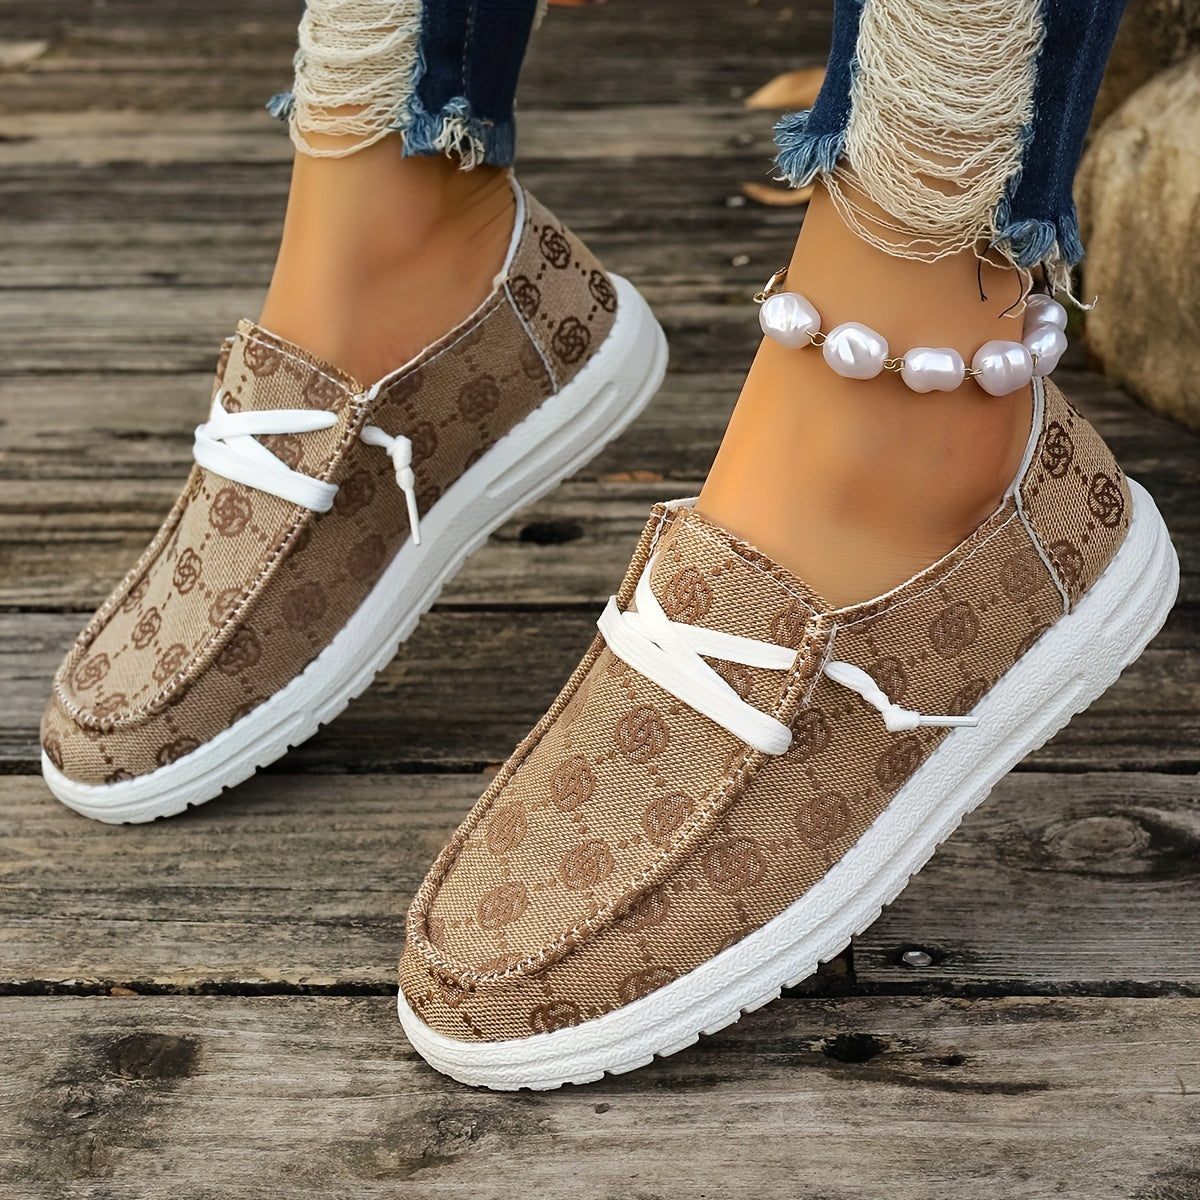 Women's Flower Pattern Canvas Shoes, Casual Lace Up Outdoor Shoes, Lightweight Low Top Sneakers